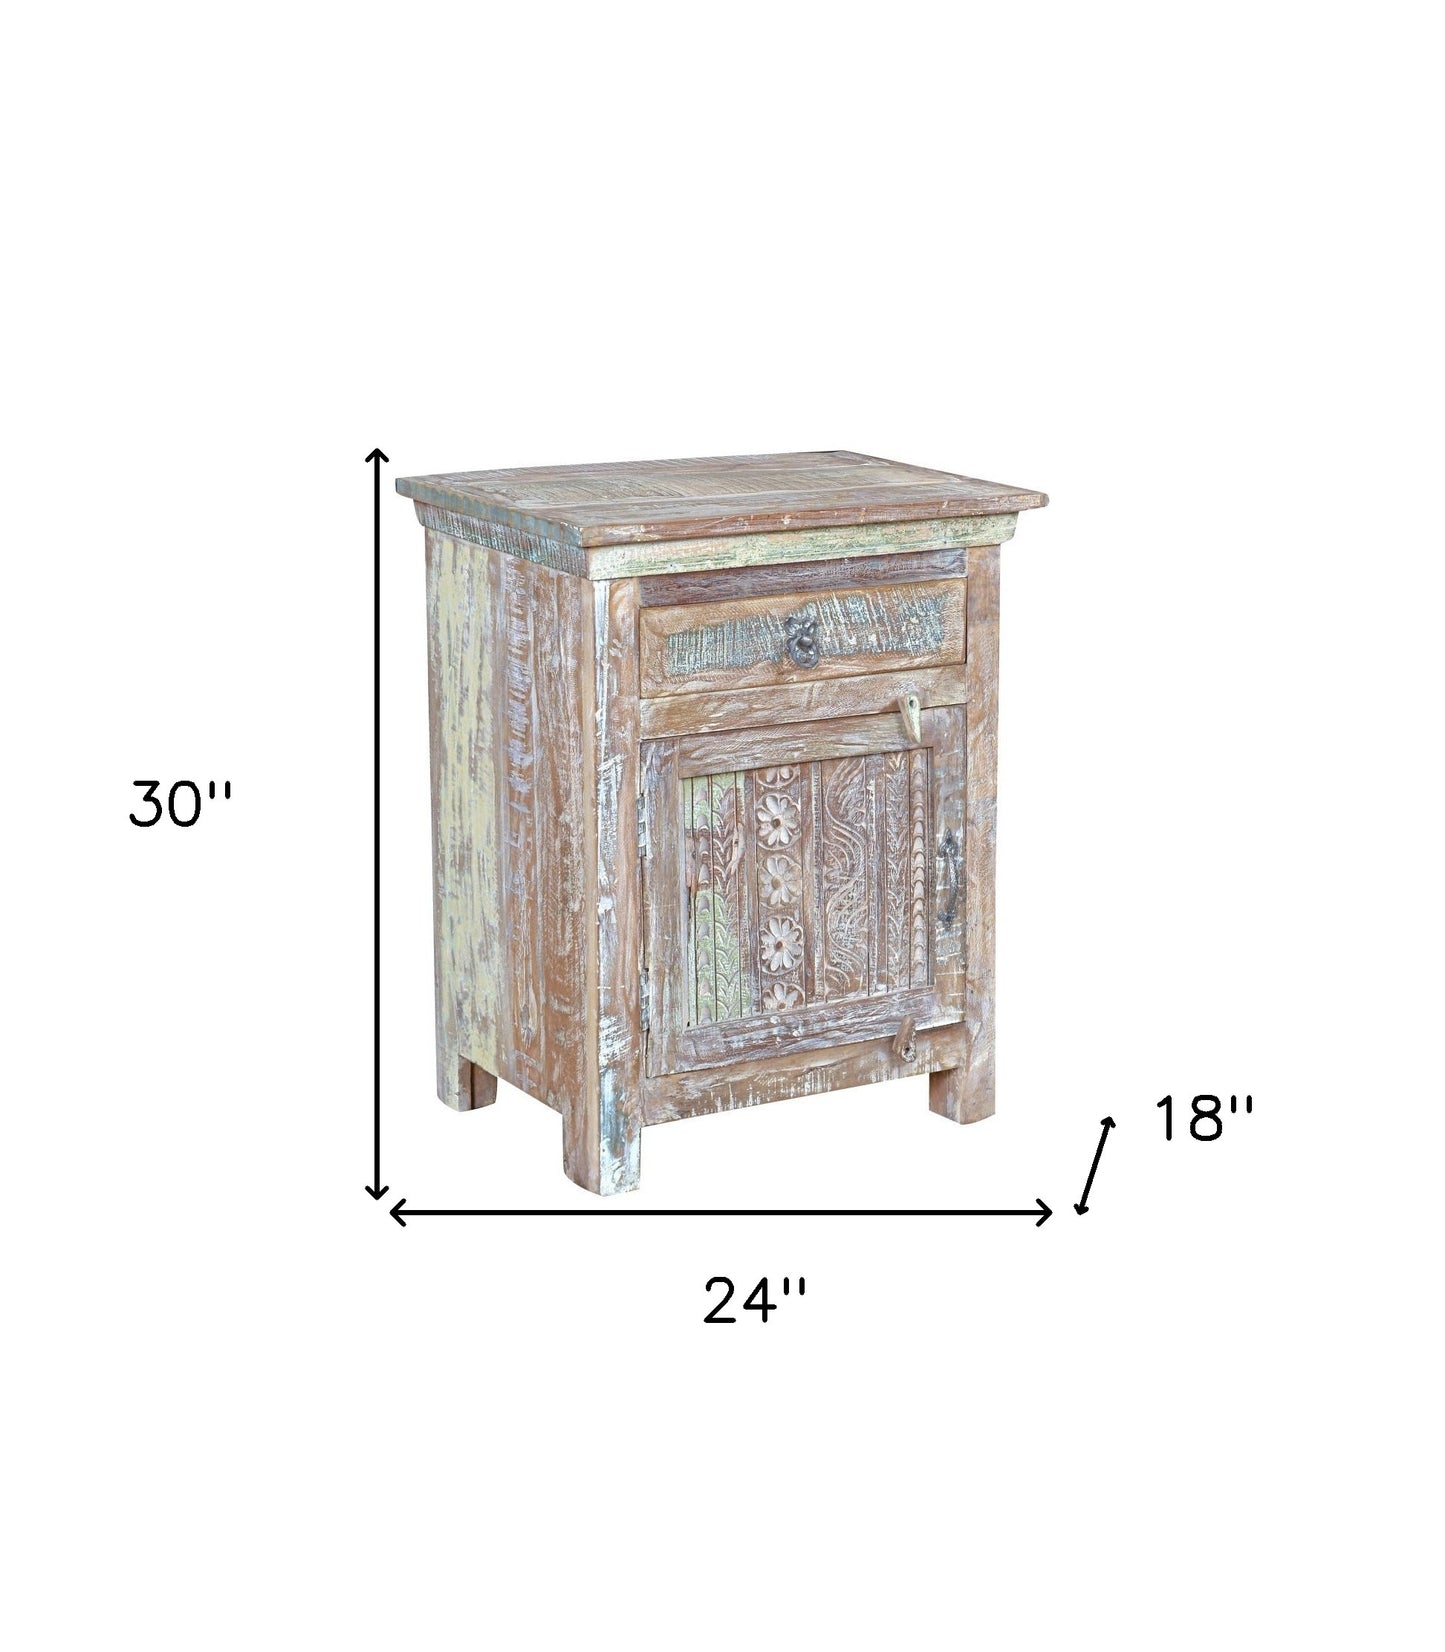 30" Distressed White One Drawer Embossed Floral Solid Wood Nightstand